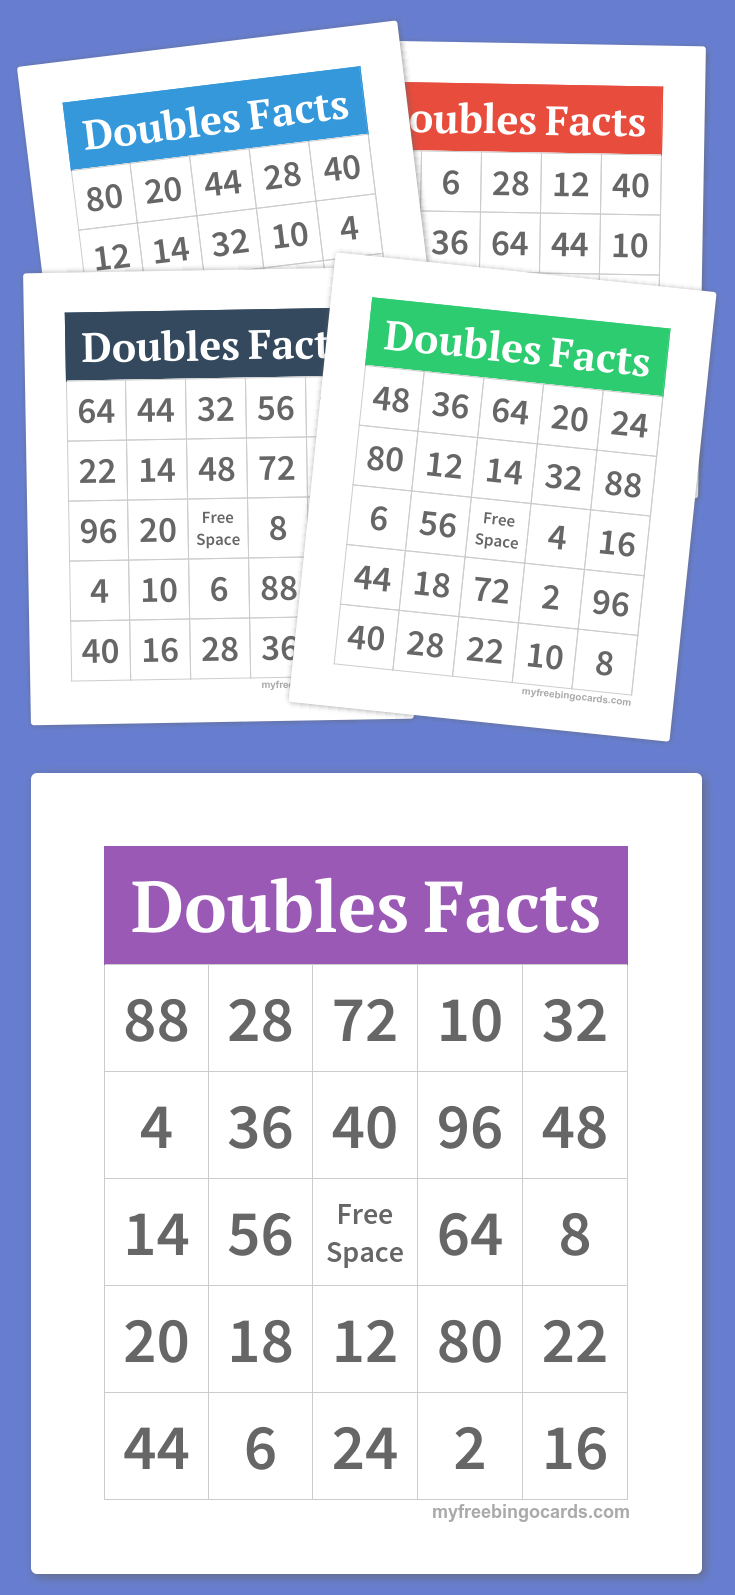 Multiplication Bingo To Practice 2S, 4S, And 8S Facts. Does Not - Free Printable Multiplication Bingo